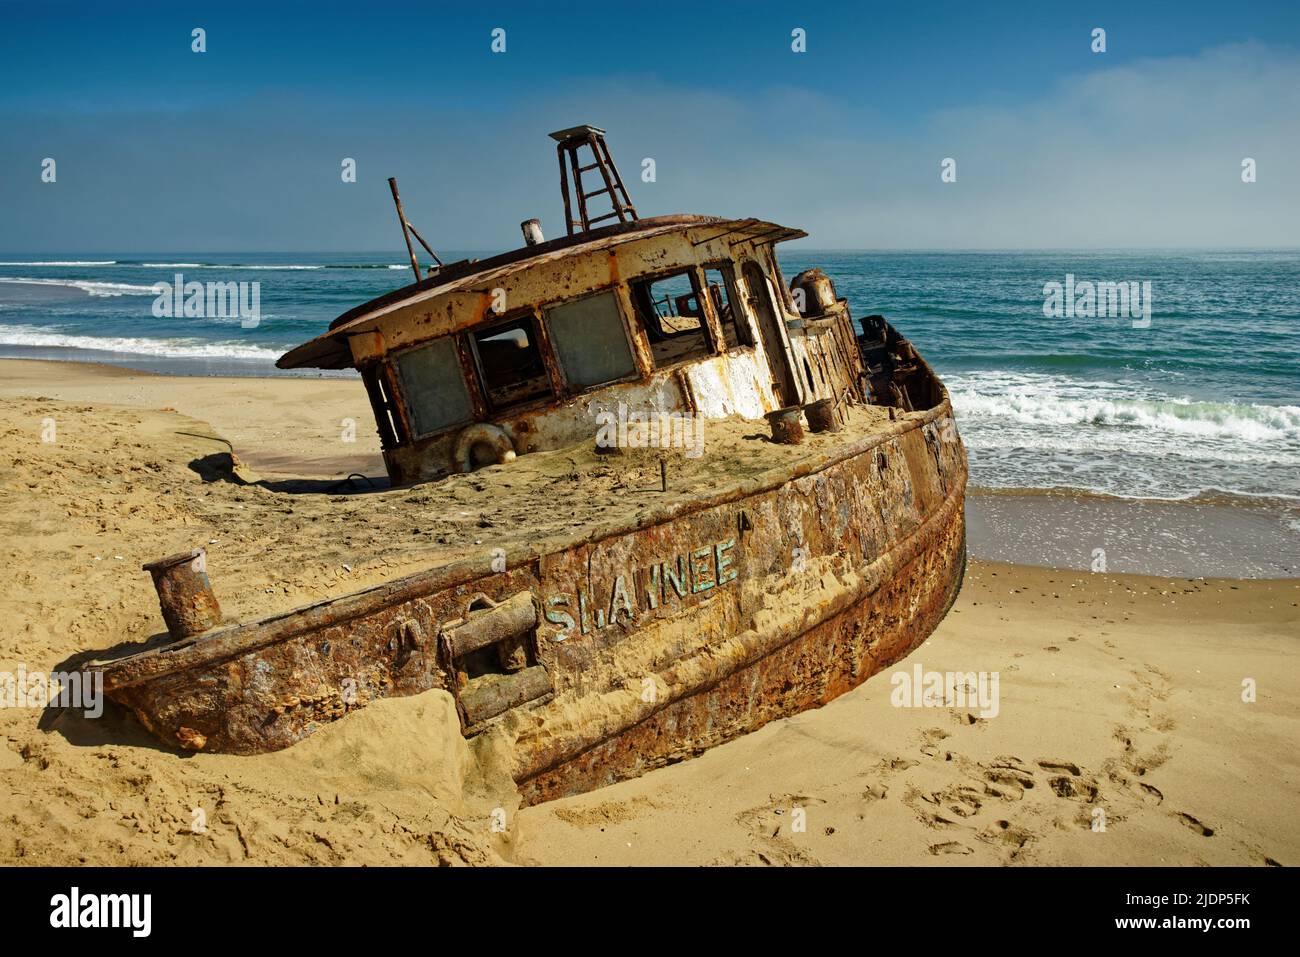 Shawnee ship that was wrecked on the Skeleton Coast of Namibia, south west Africa. Stock Photo